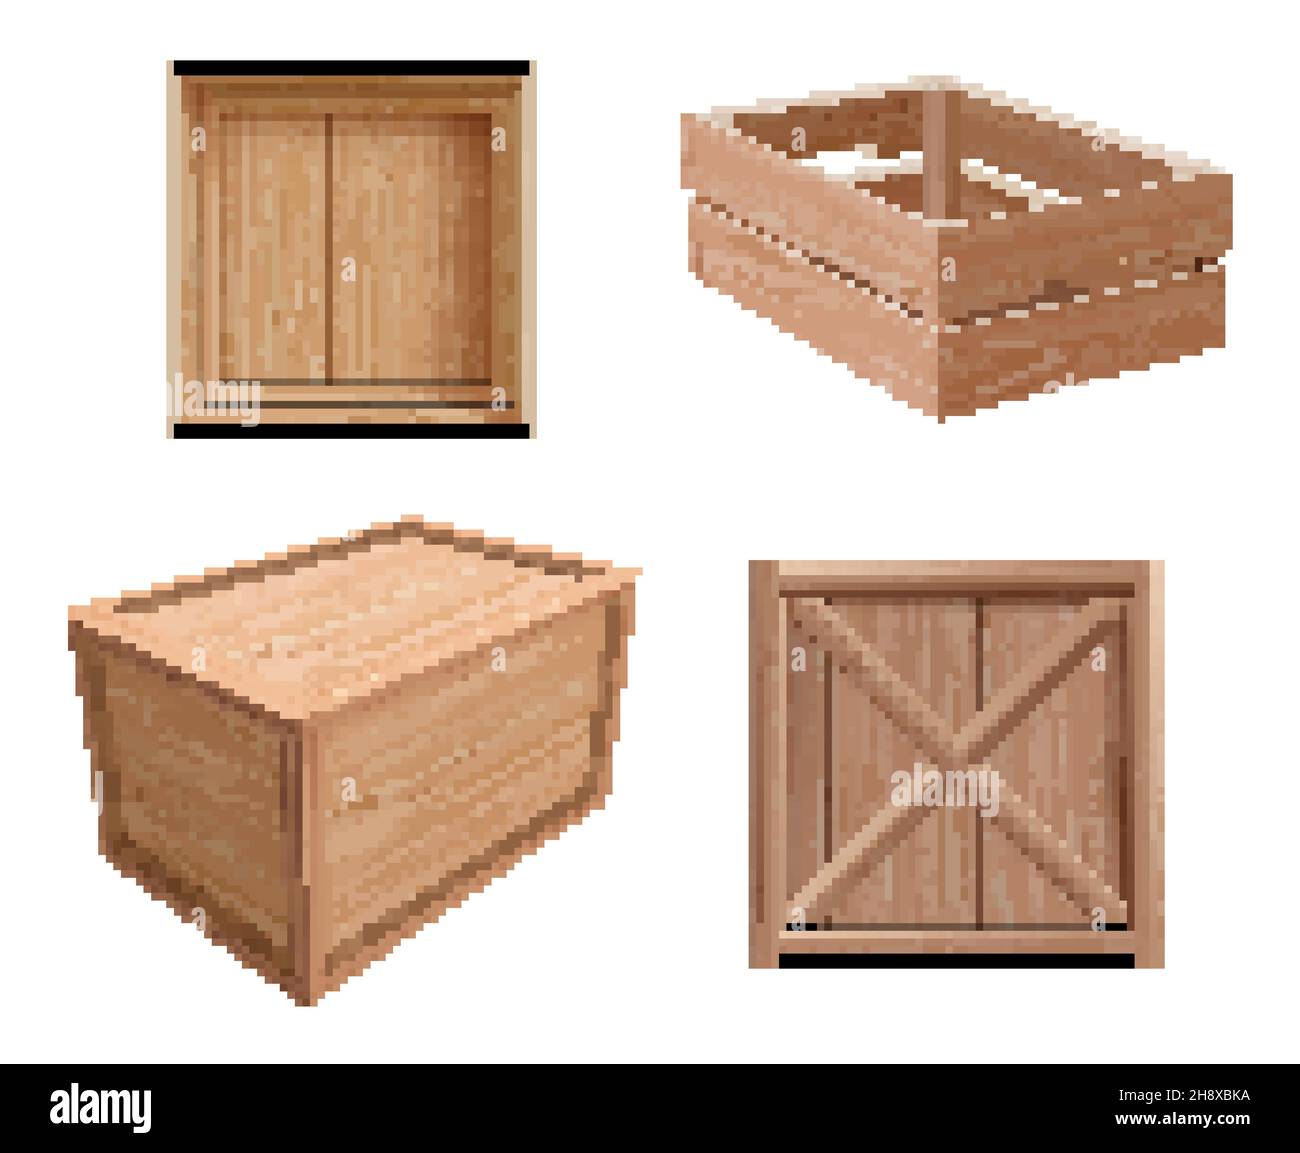 Wooden boxes. Freight containers open and closed for fragile gifts packages with wooden textures decent vector realistic illustrations Stock Vector